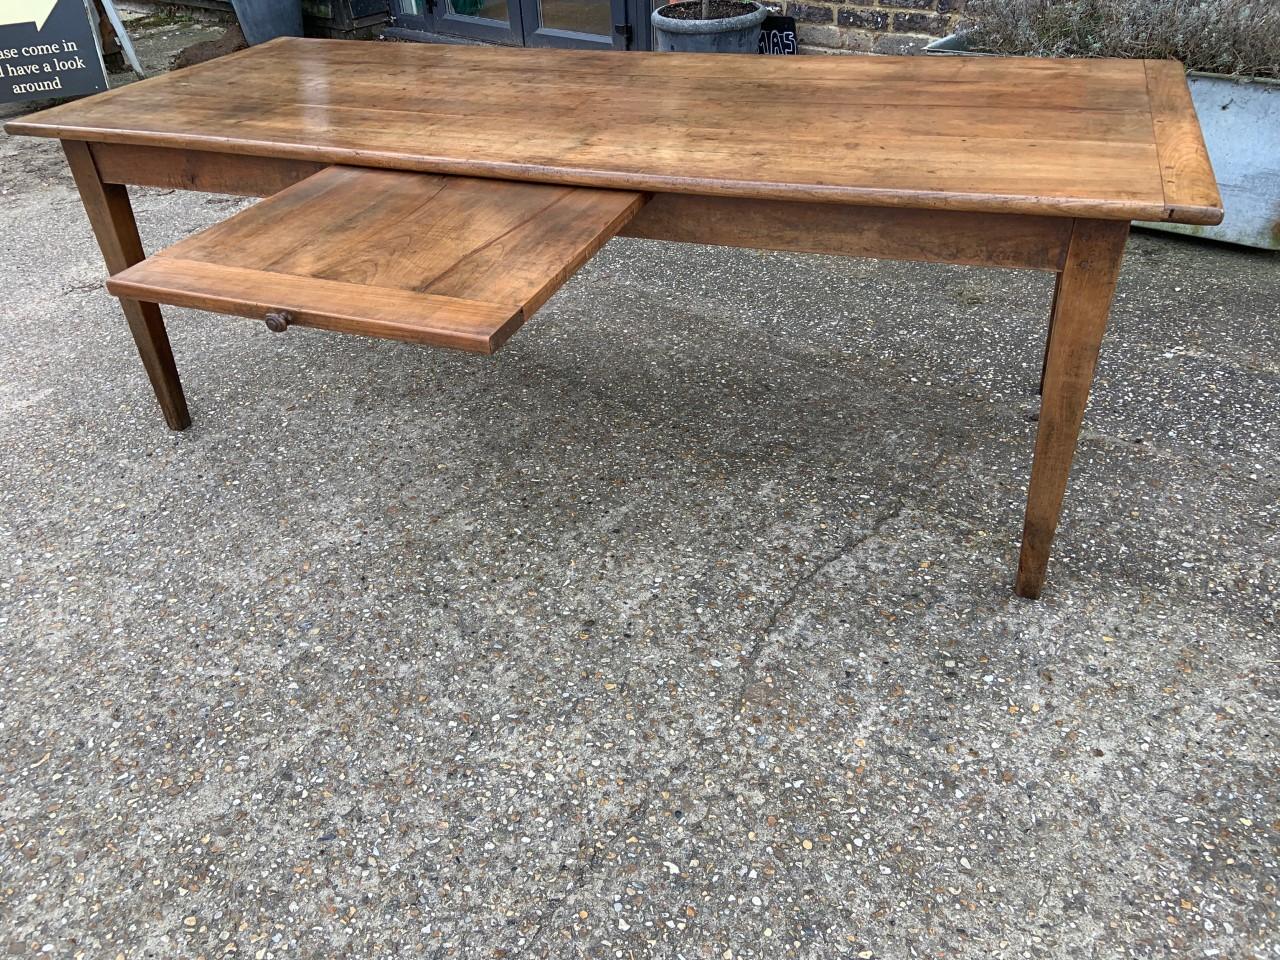 Rustic antique cherry farmhouse table with slide and tapered legs. 19th century farmhouse table with gorgeous patination and color. Table has little bread slide on one side.
          